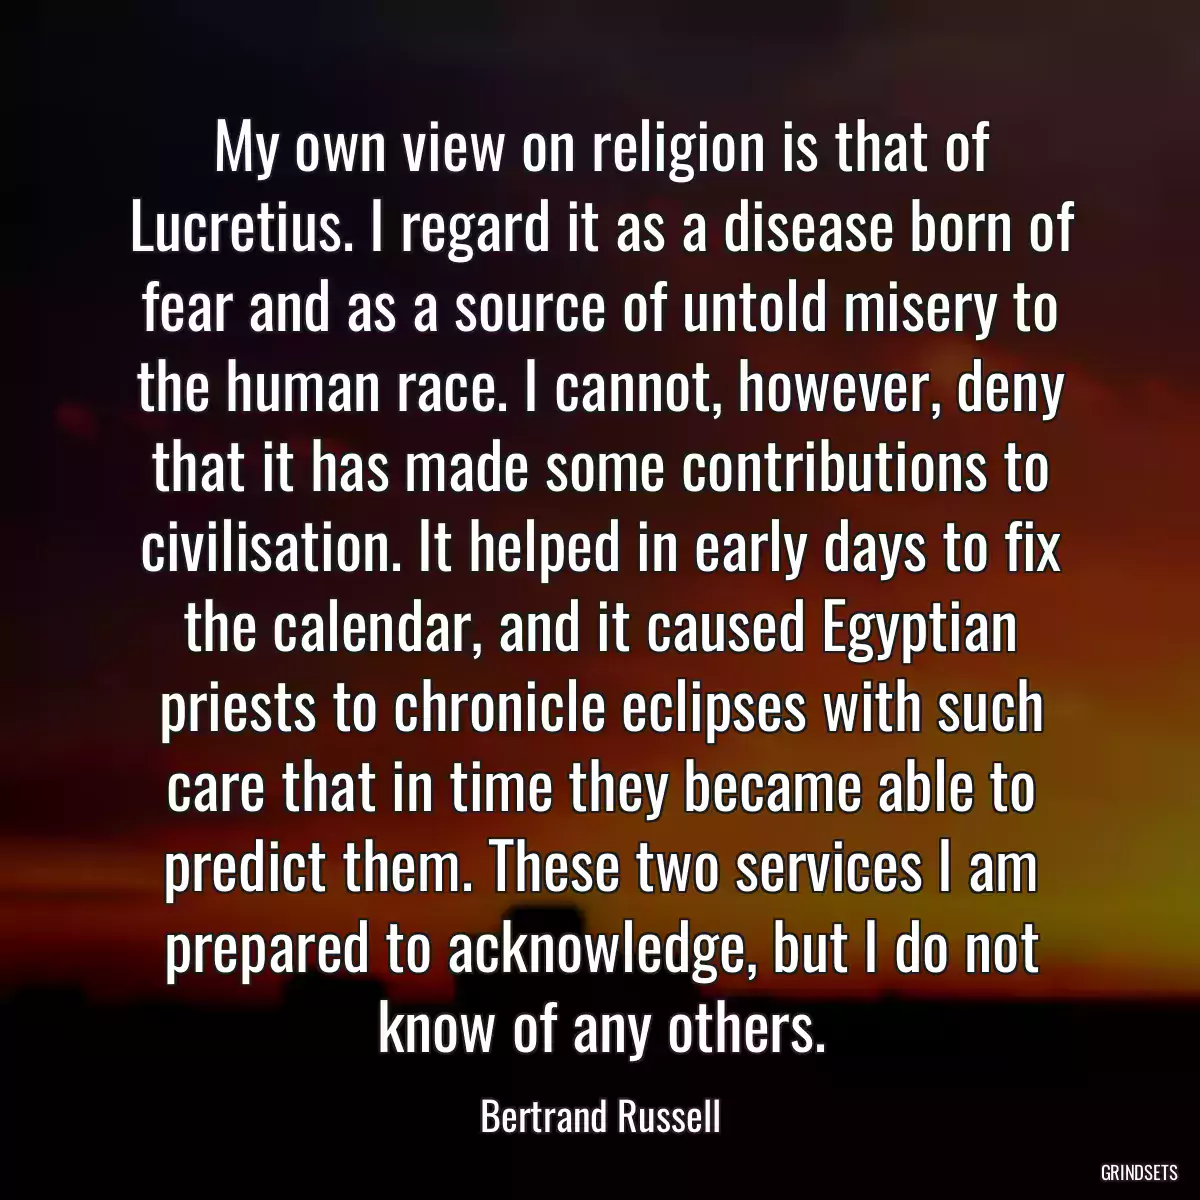 My own view on religion is that of Lucretius. I regard it as a disease born of fear and as a source of untold misery to the human race. I cannot, however, deny that it has made some contributions to civilisation. It helped in early days to fix the calendar, and it caused Egyptian priests to chronicle eclipses with such care that in time they became able to predict them. These two services I am prepared to acknowledge, but I do not know of any others.